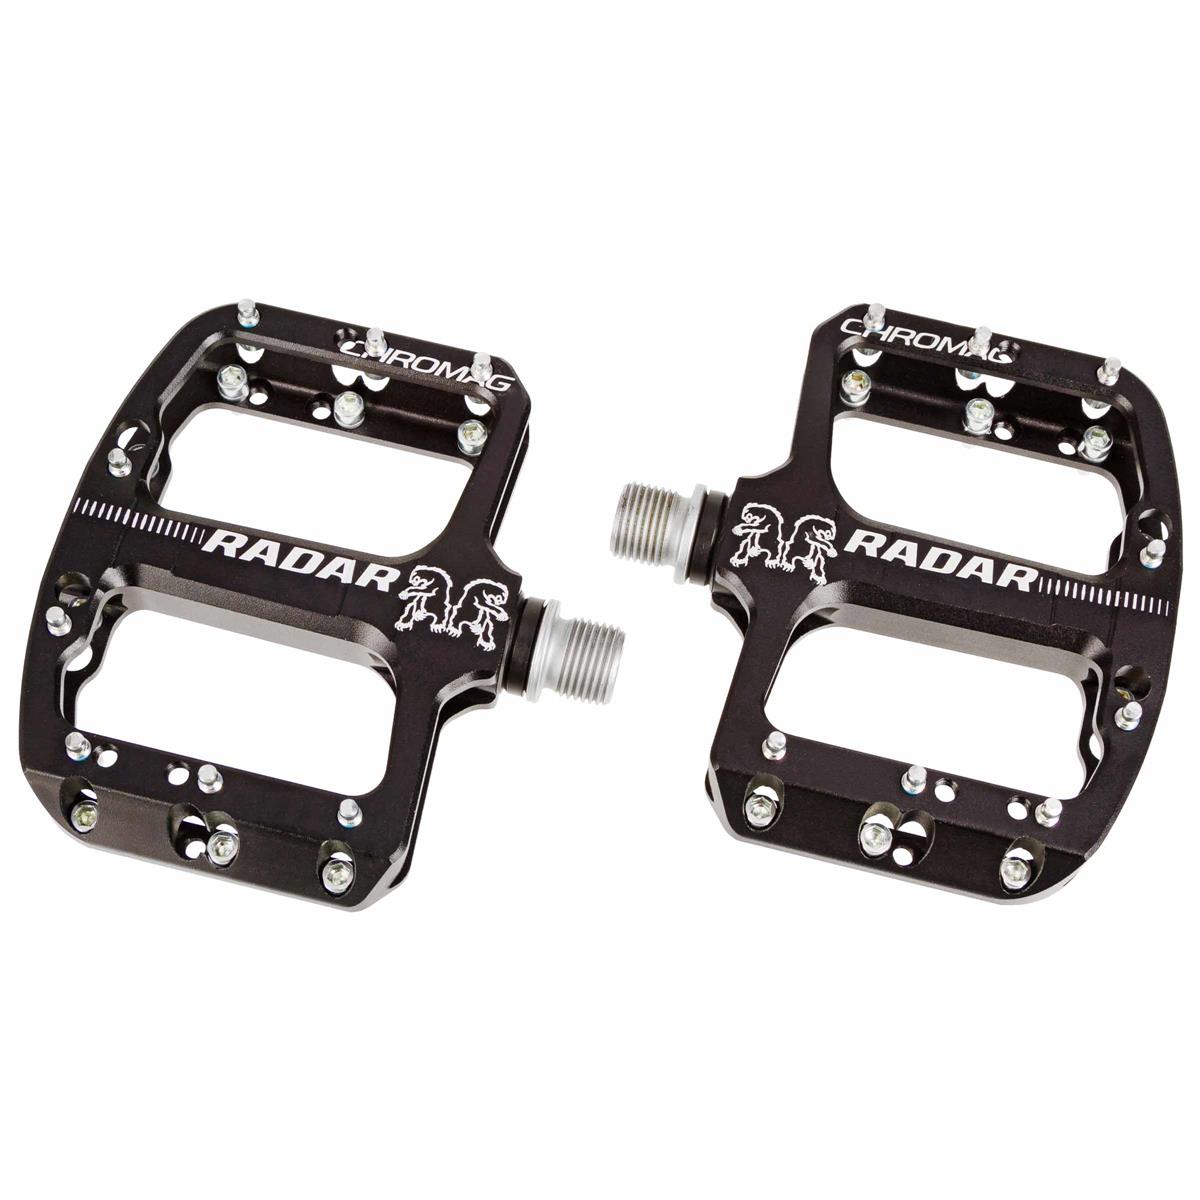 Chromag Pedals Radar Kids Especially for young riders, Black